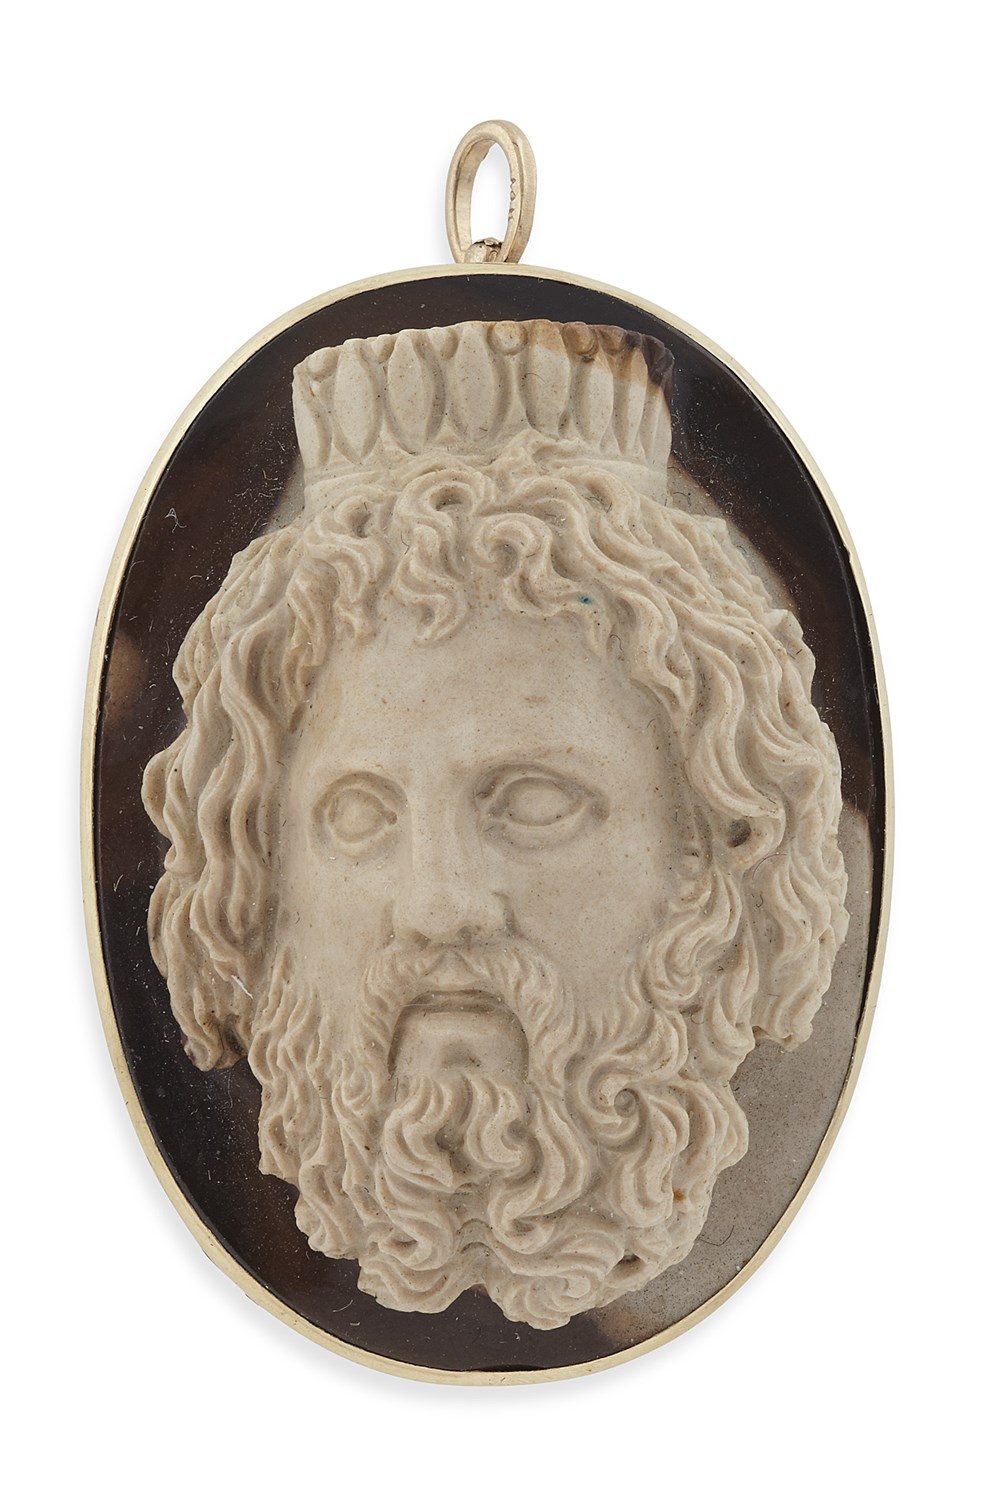 Lot 59 - An early 19th century carved hardstone cameo